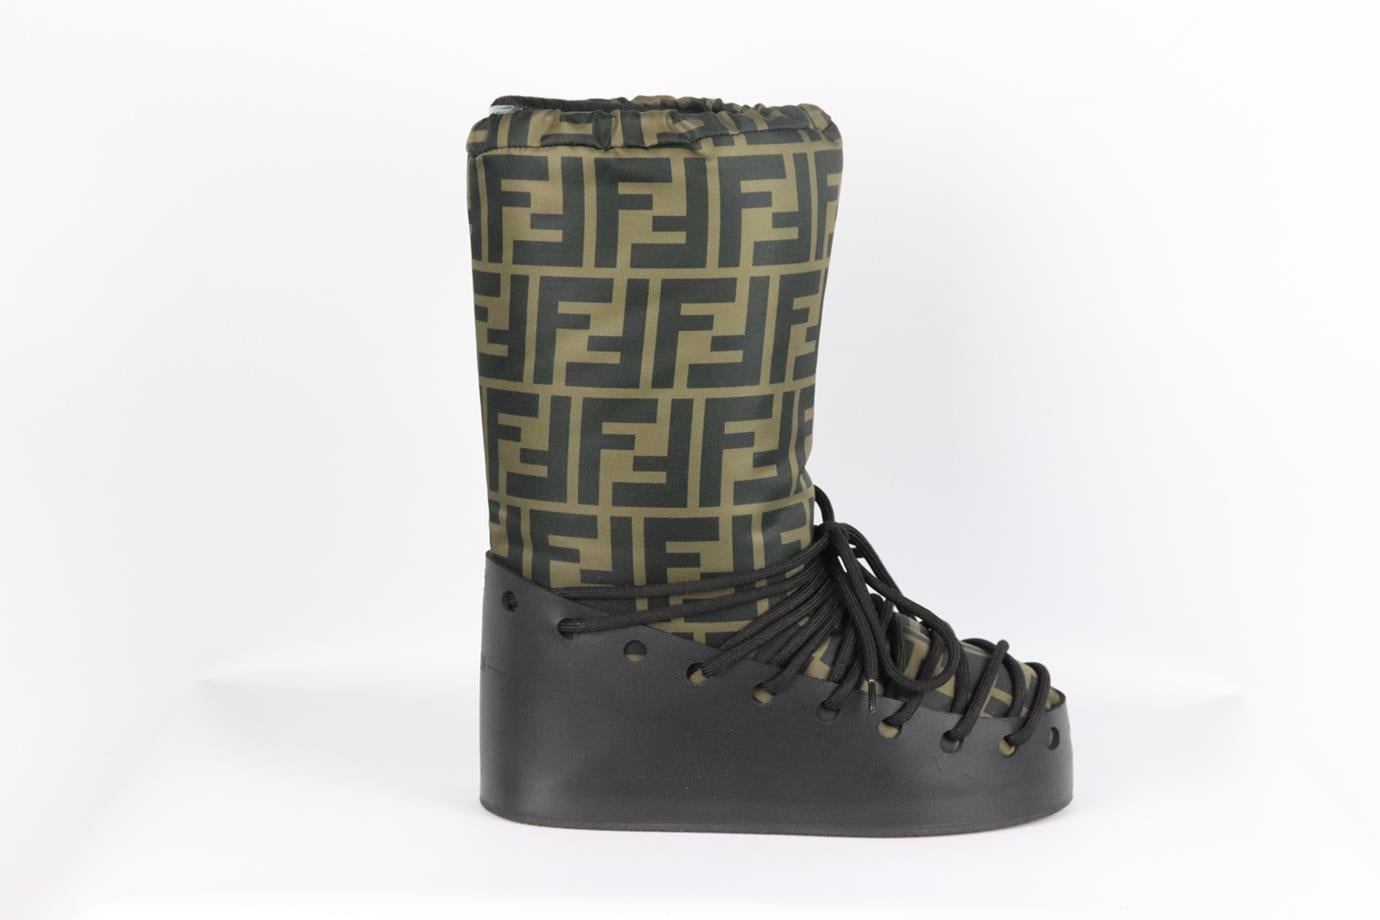 Fendi FF printed shell and leather snow boots. Brown and black. Pull on. Does not come with dustbag or box. Size: EU 38 (UK 5, US 6). Outersole: 11 in. Shaft: 10.1 in. Heel Height: 2.5 in. New without box